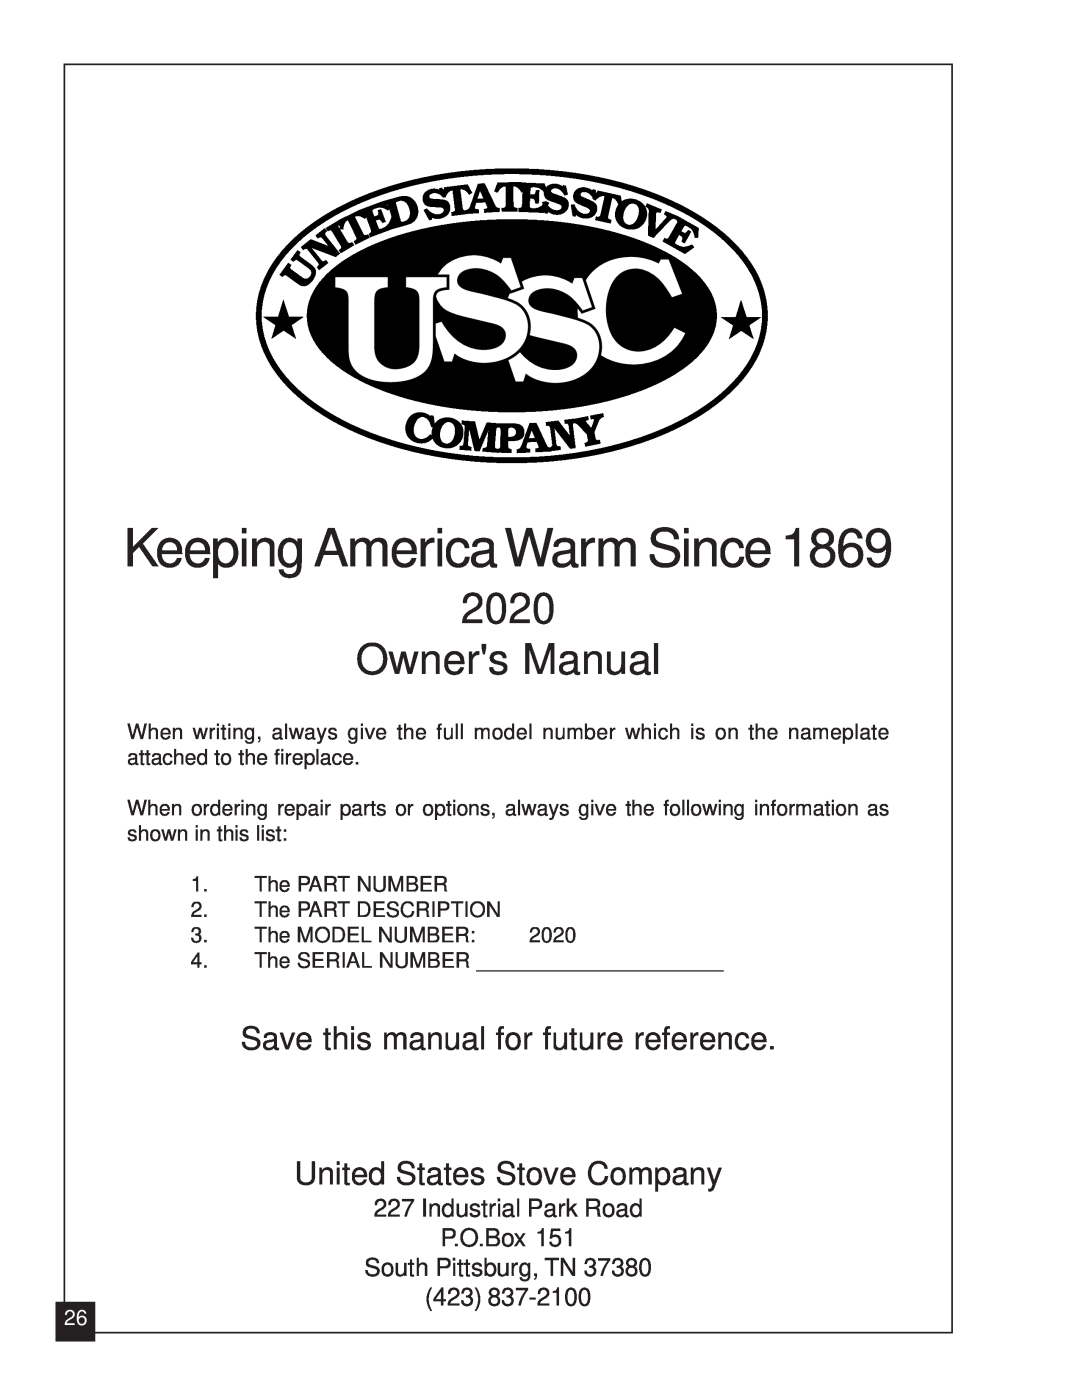 United States Stove 2020L Industrial Park Road P.O.Box, South Pittsburg, TN, Ussc, Keeping America Warm Since, Mpan 